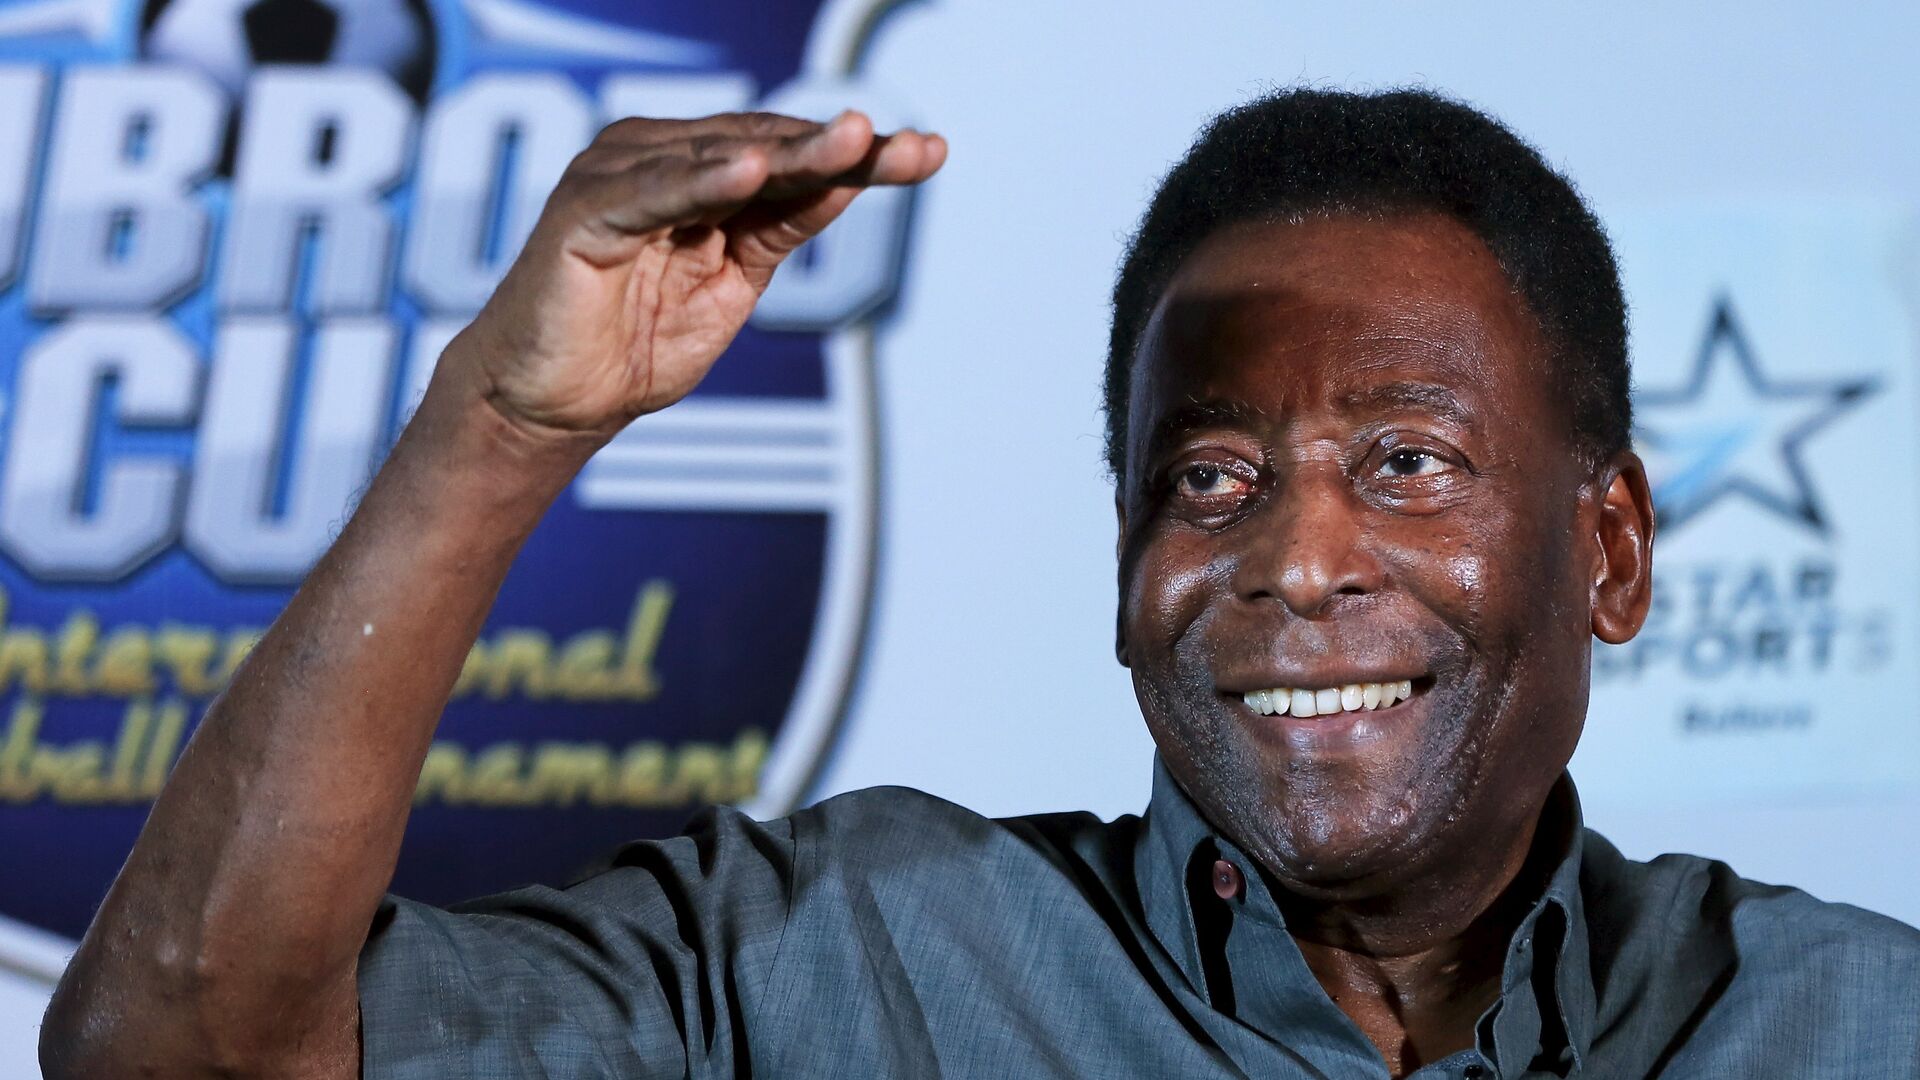 Legendary Brazilian soccer player Pele gestures during a news conference in Gurgaon on the outskirts of New Delhi, India, October 15, 2015 - اسپوتنیک افغانستان  , 1920, 14.03.2021